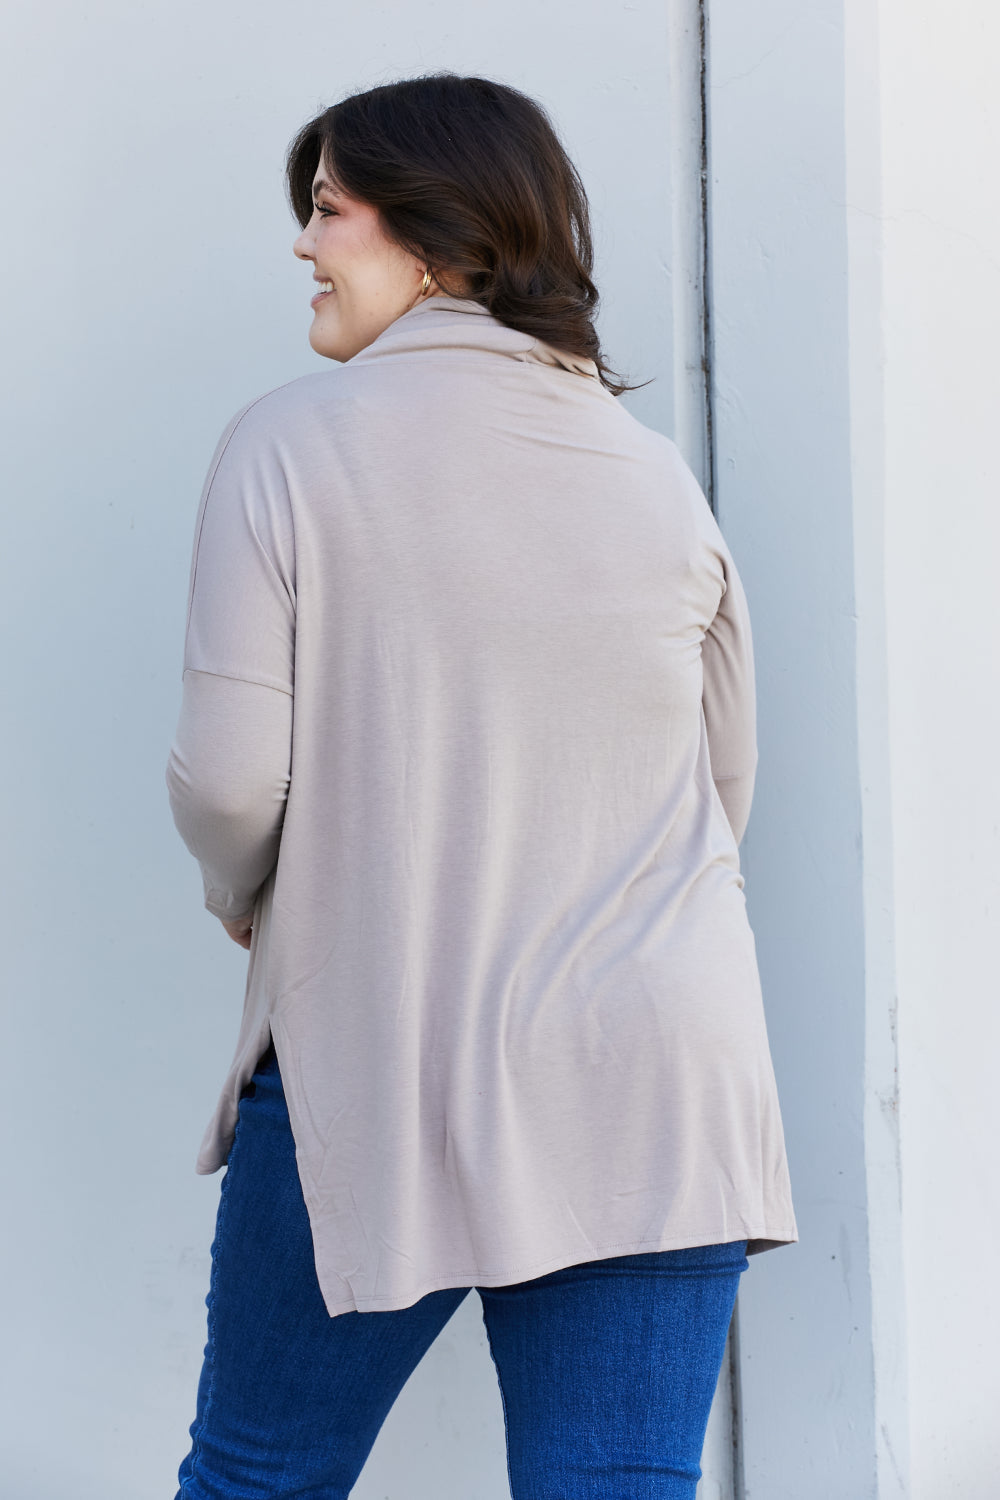 Cowl Neck Tunic in Ash Mocha-tunic-Trendsi-Styled by Steph-Women's Fashion Clothing Boutique, Indiana